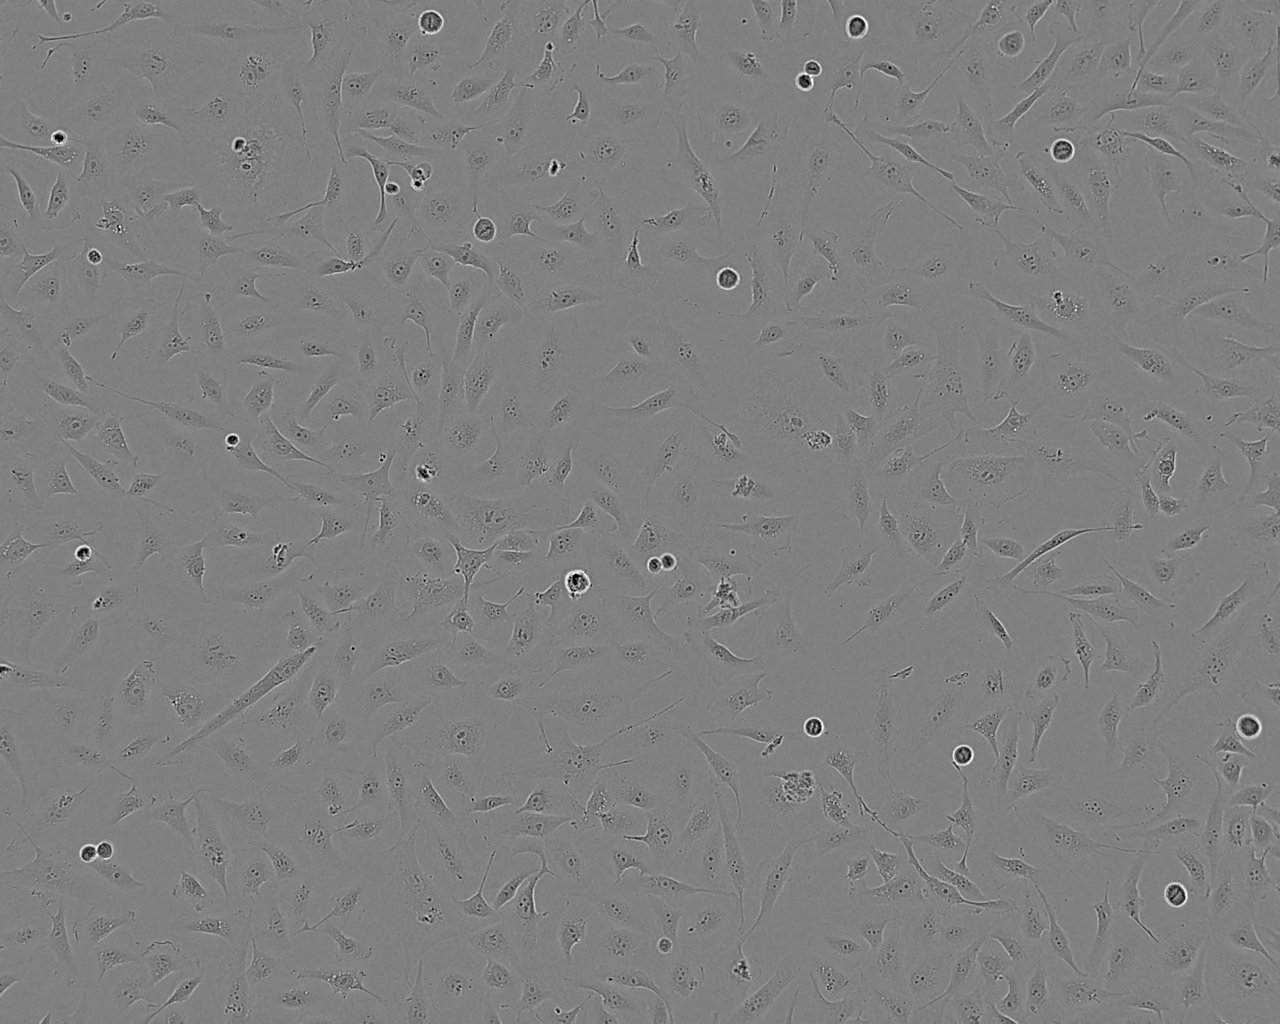 HuP-T4 epithelioid cells人胰腺癌细胞系,HuP-T4 epithelioid cells